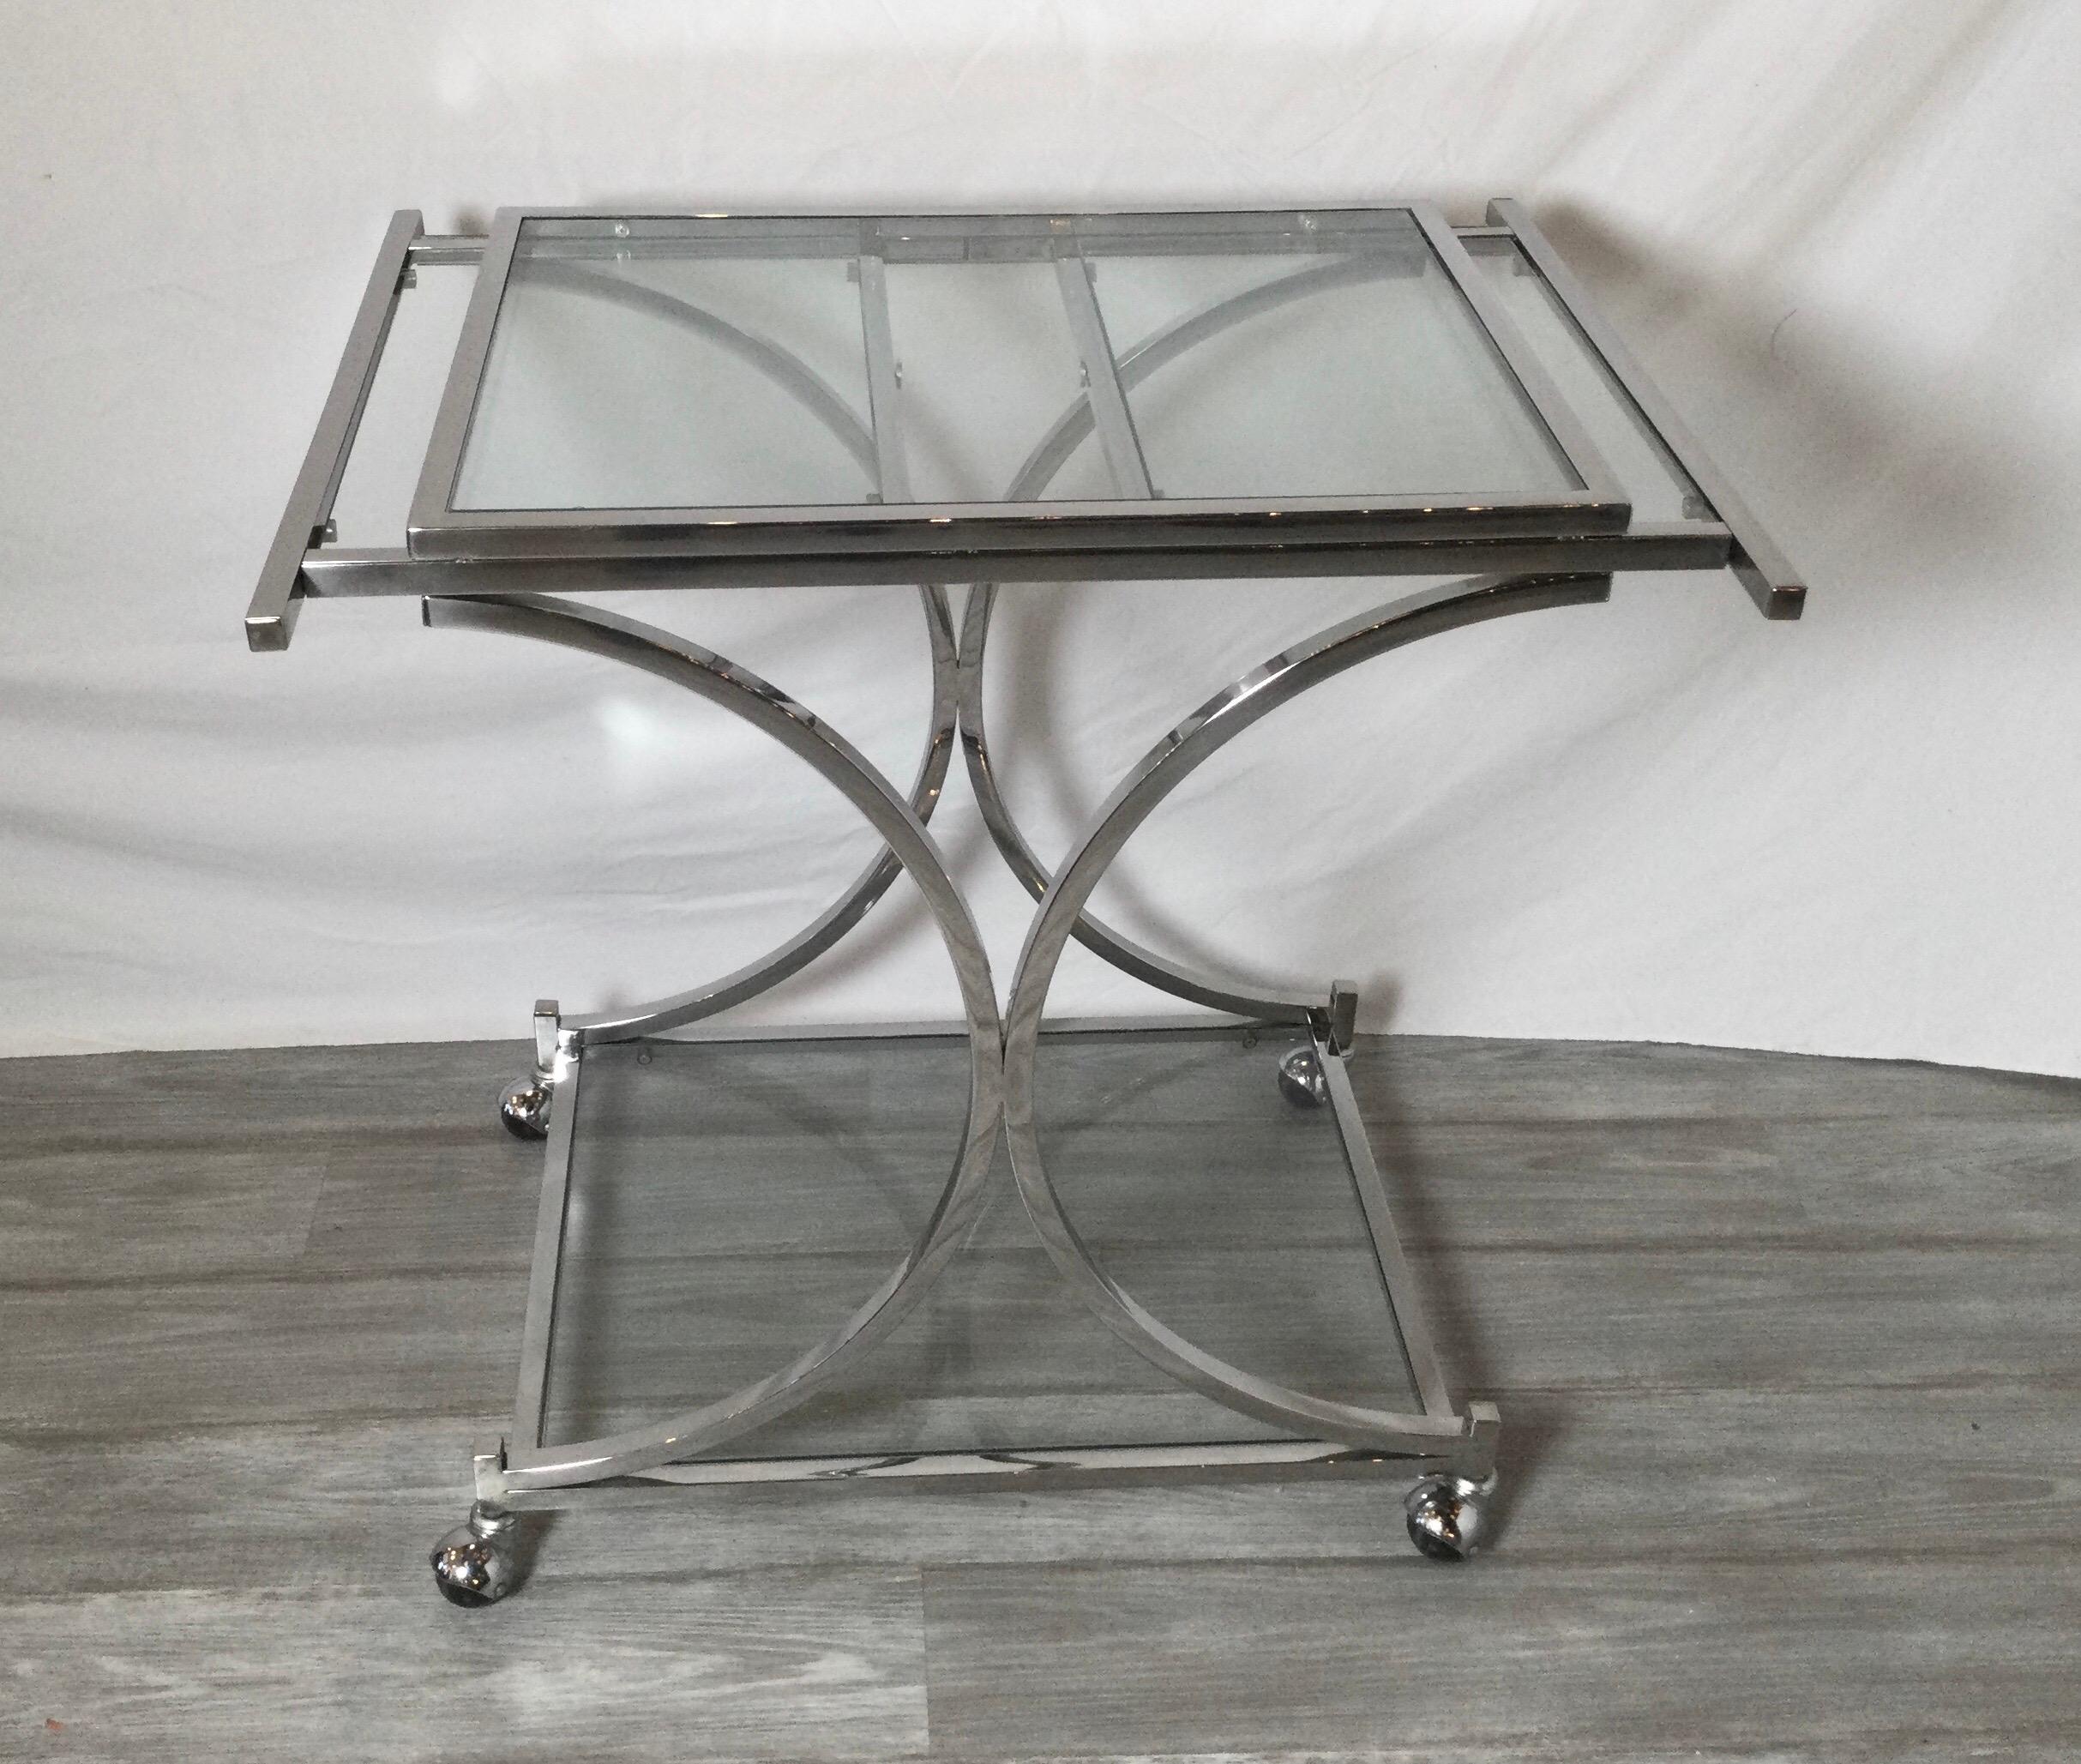 A chic chrome and glass bar or dessert cart with expandable sides. The top tier with leafs that pull out for extra working surface. Measures: 31.5 closed, opens to 51 inches.